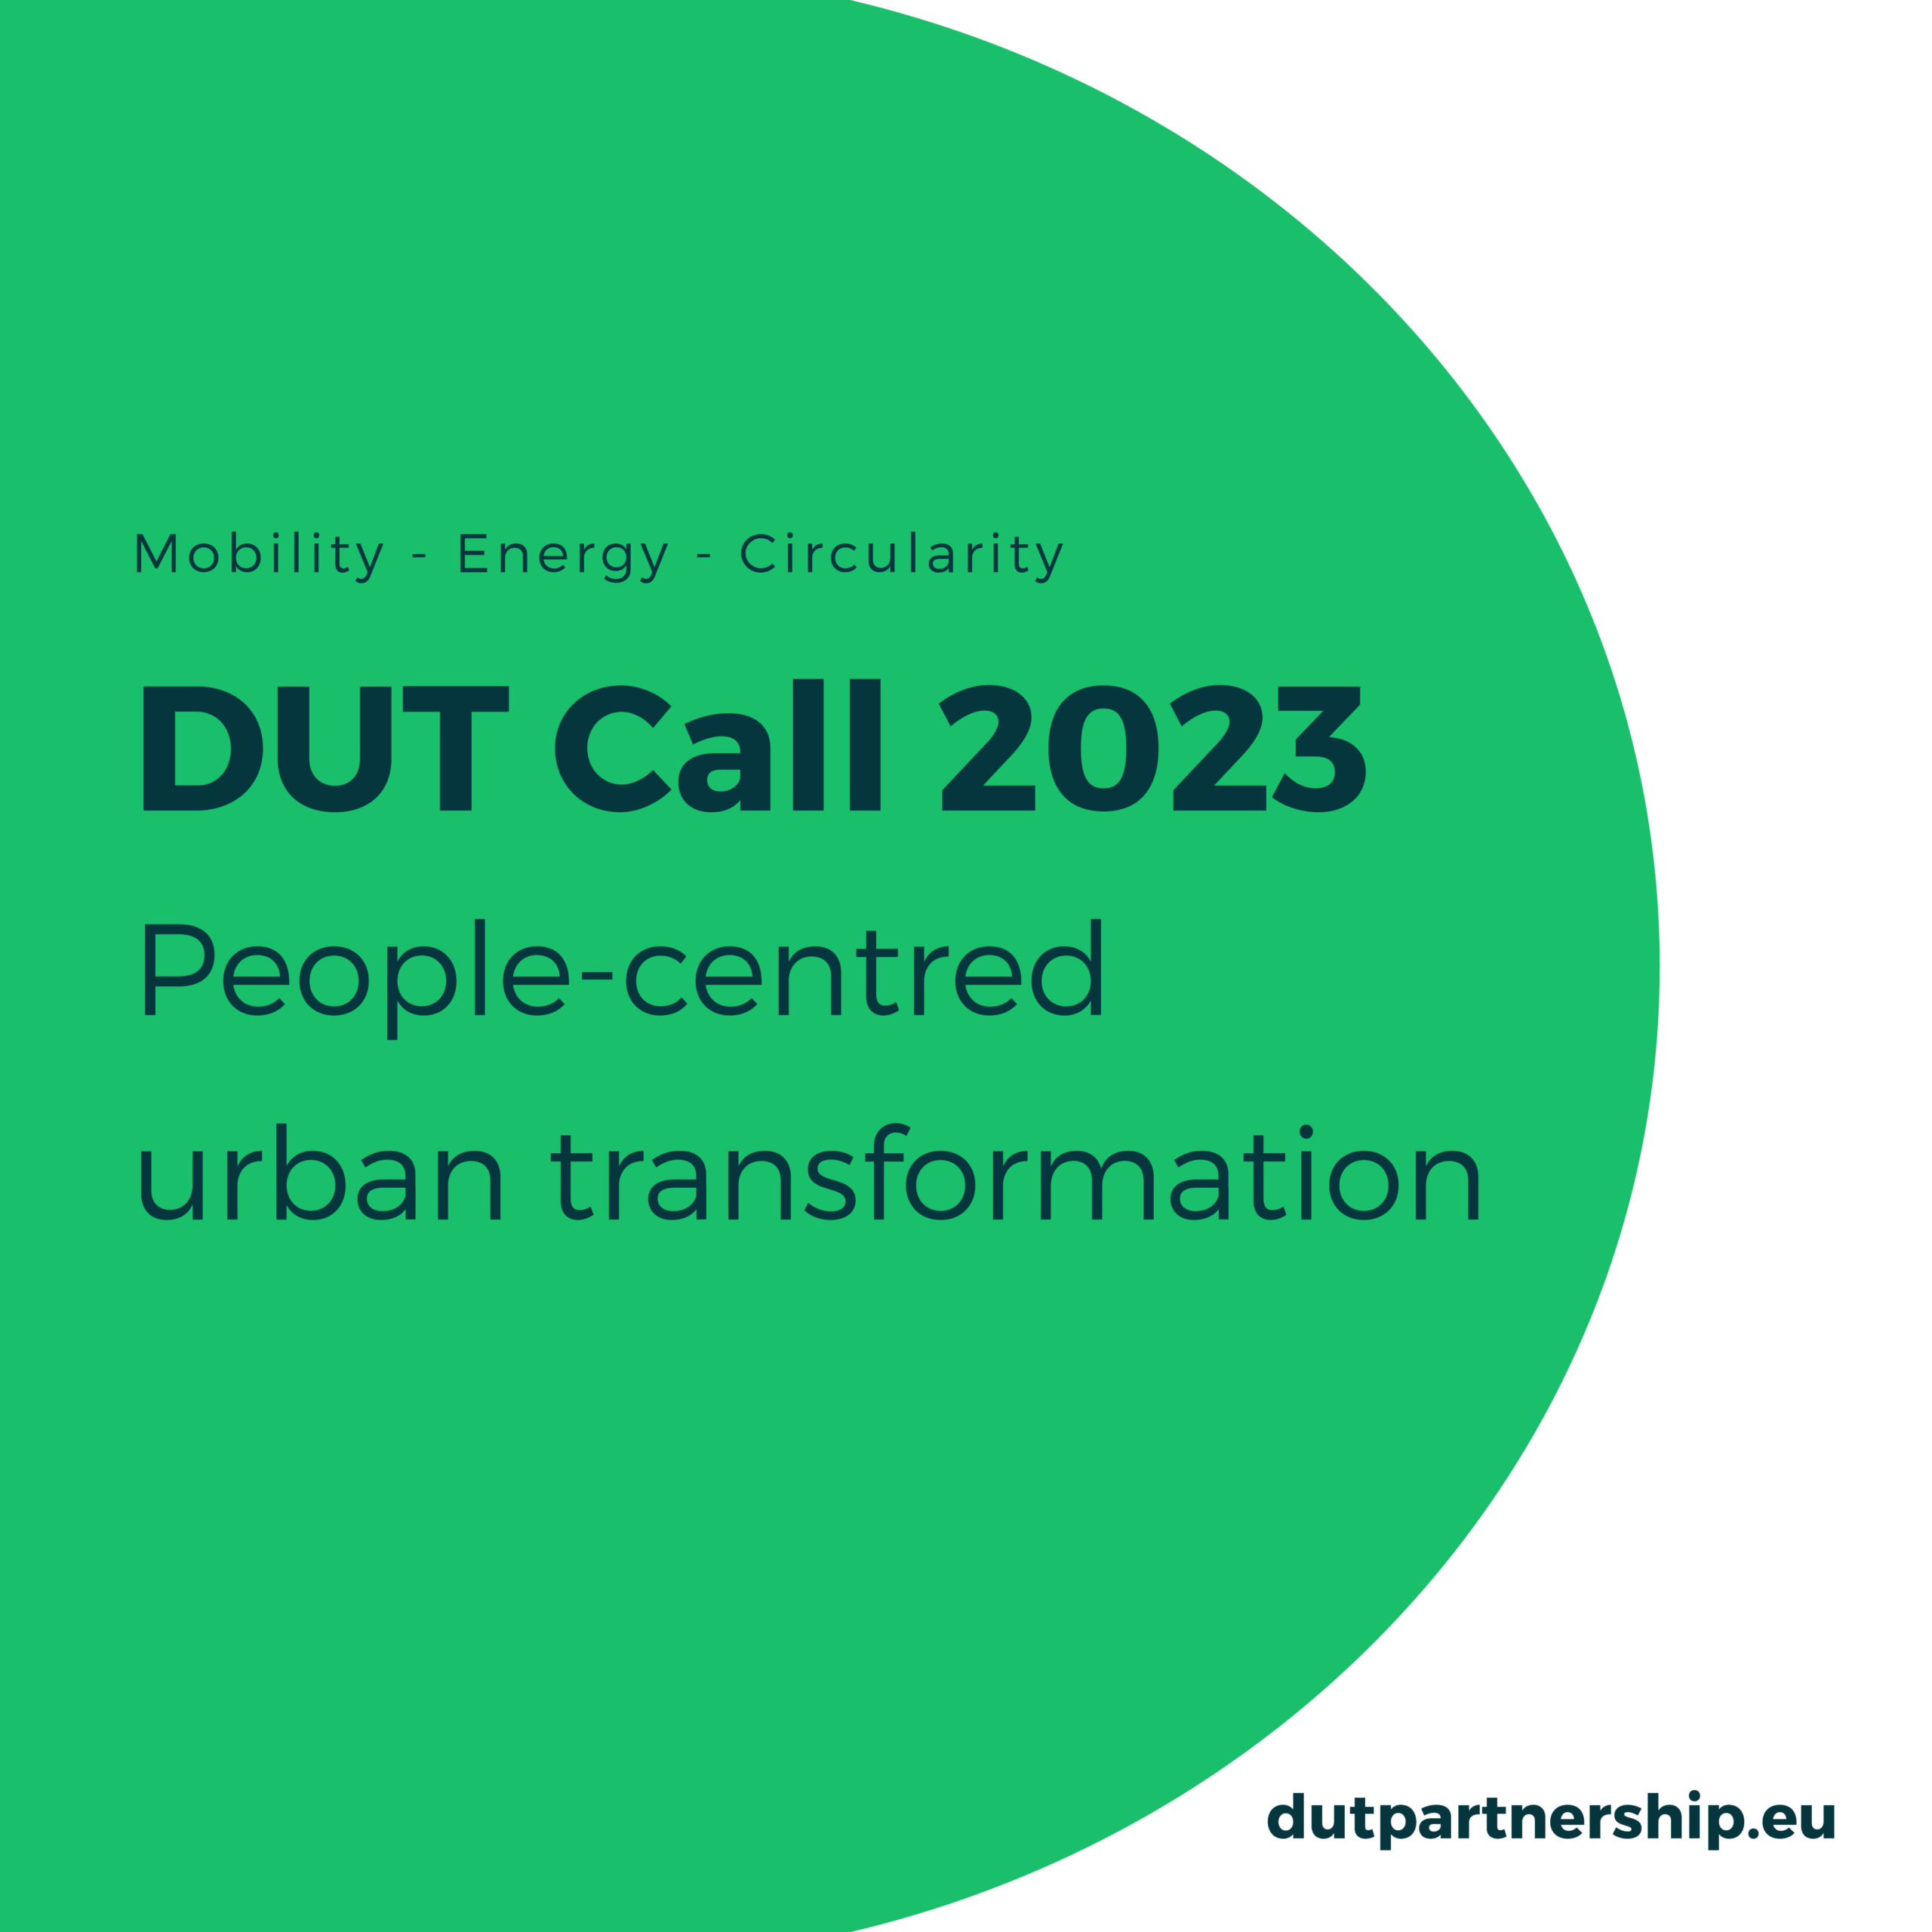 DRIVING URBAN TRANSITIONS call 2023